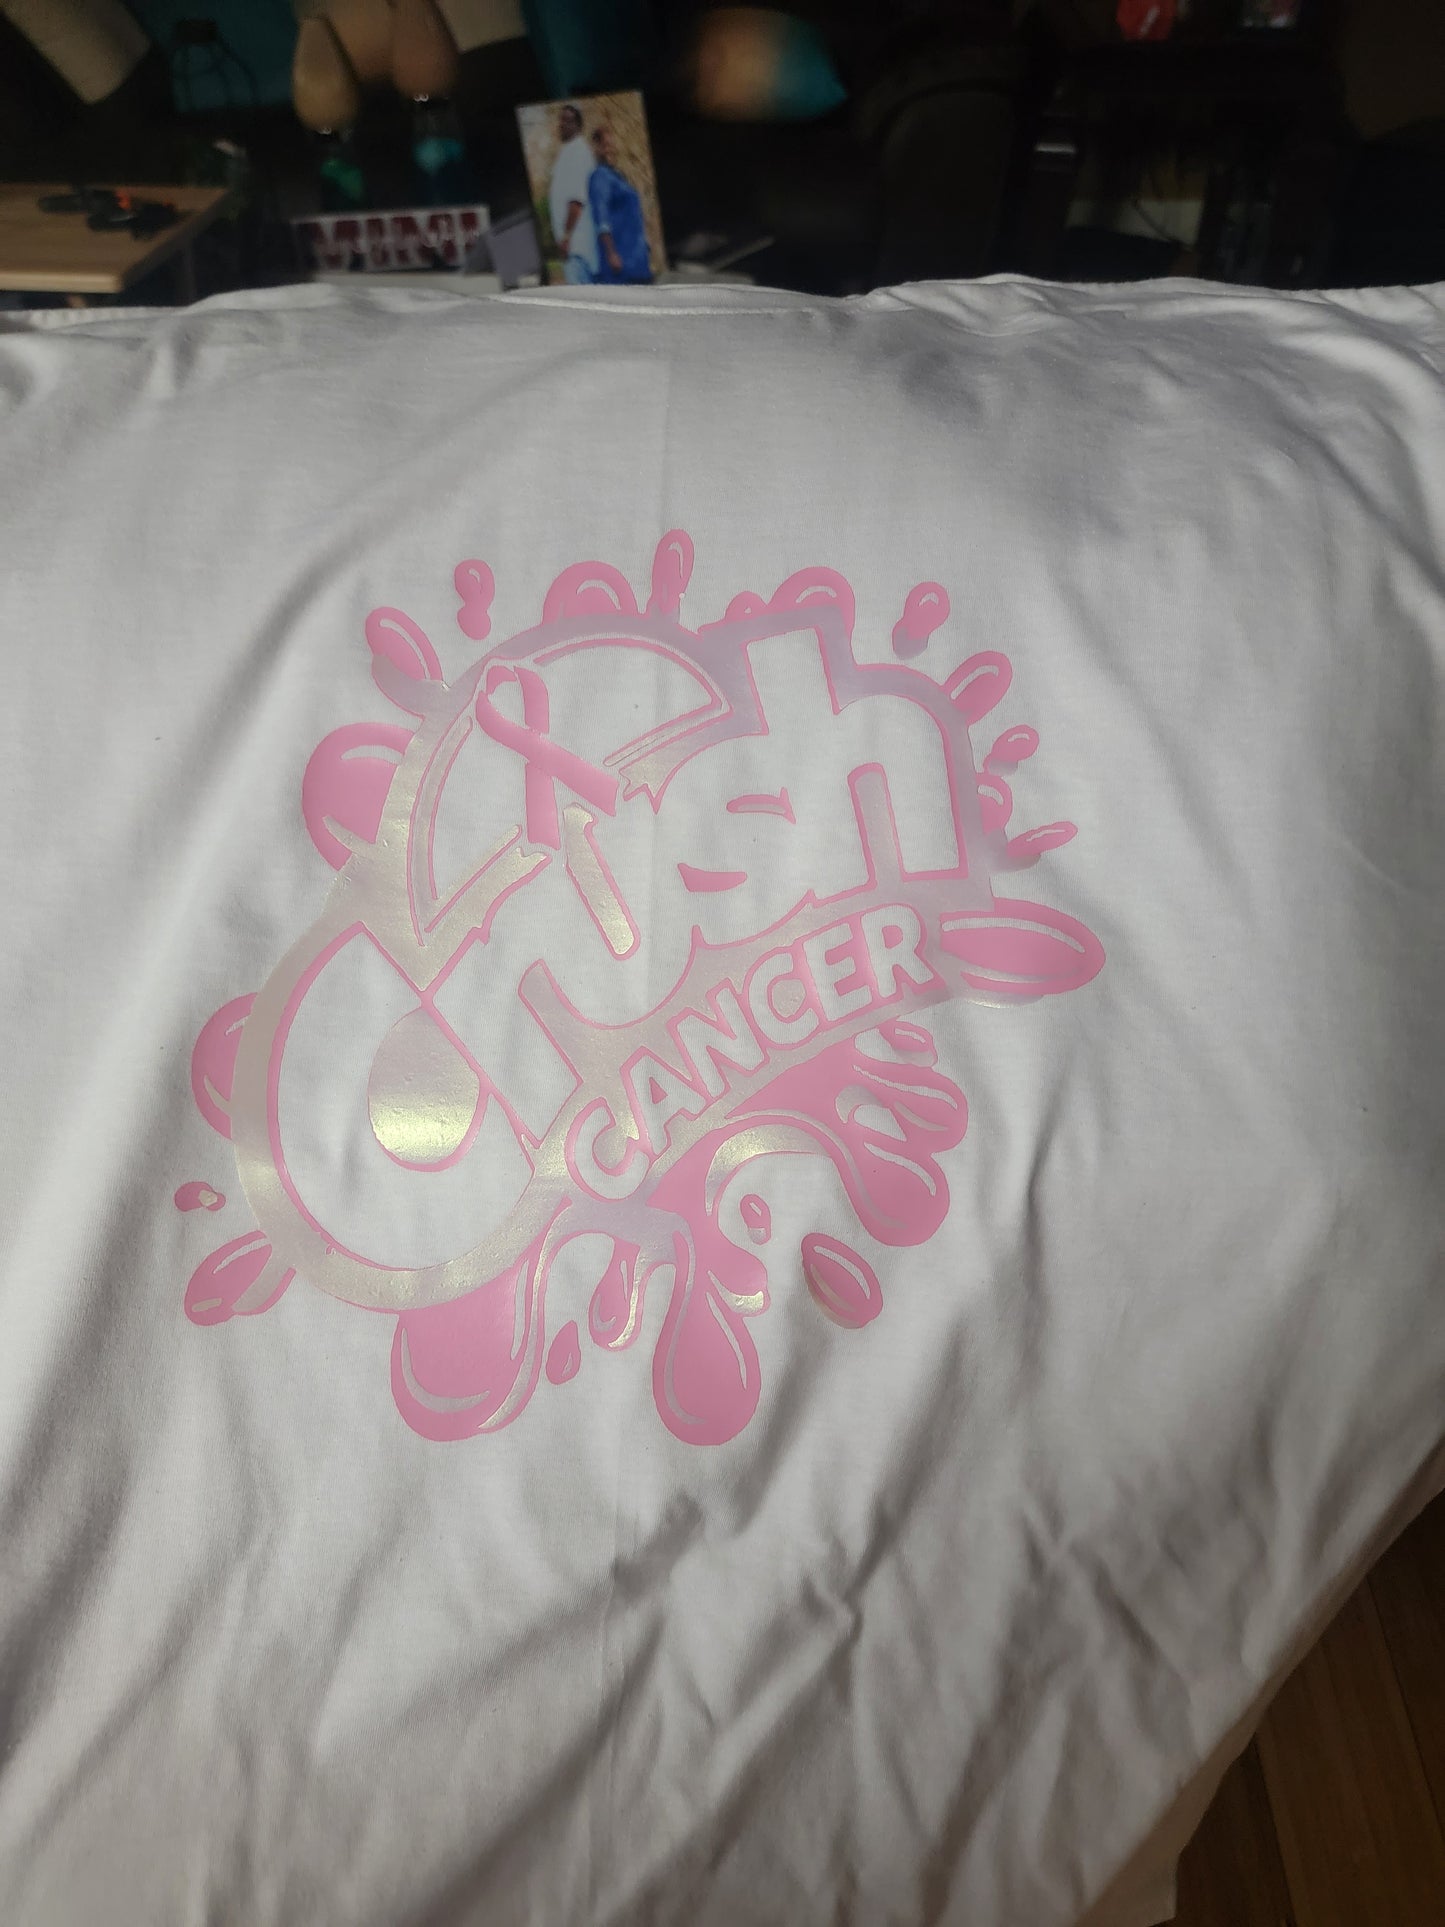 Breast cancer t-shirts